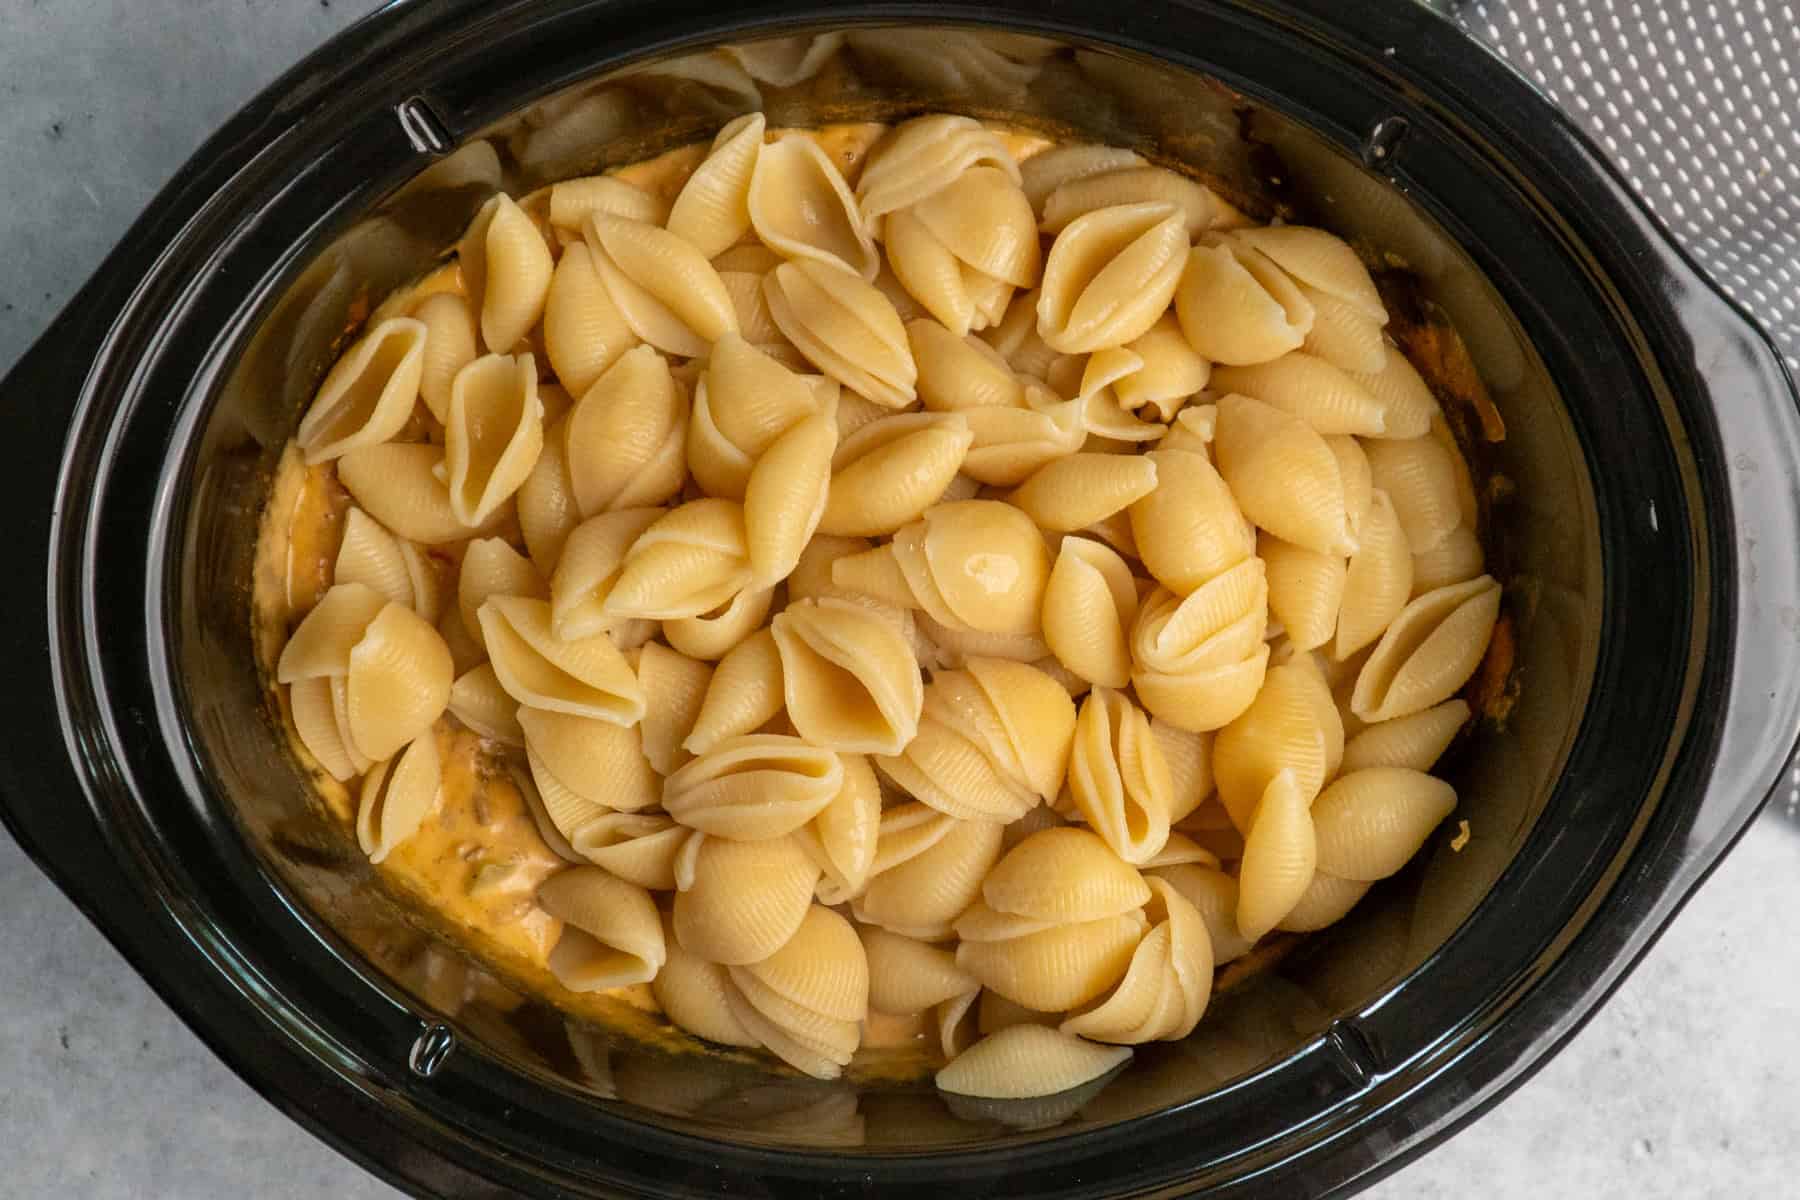 Cooked macaroni shells in a crock pot.